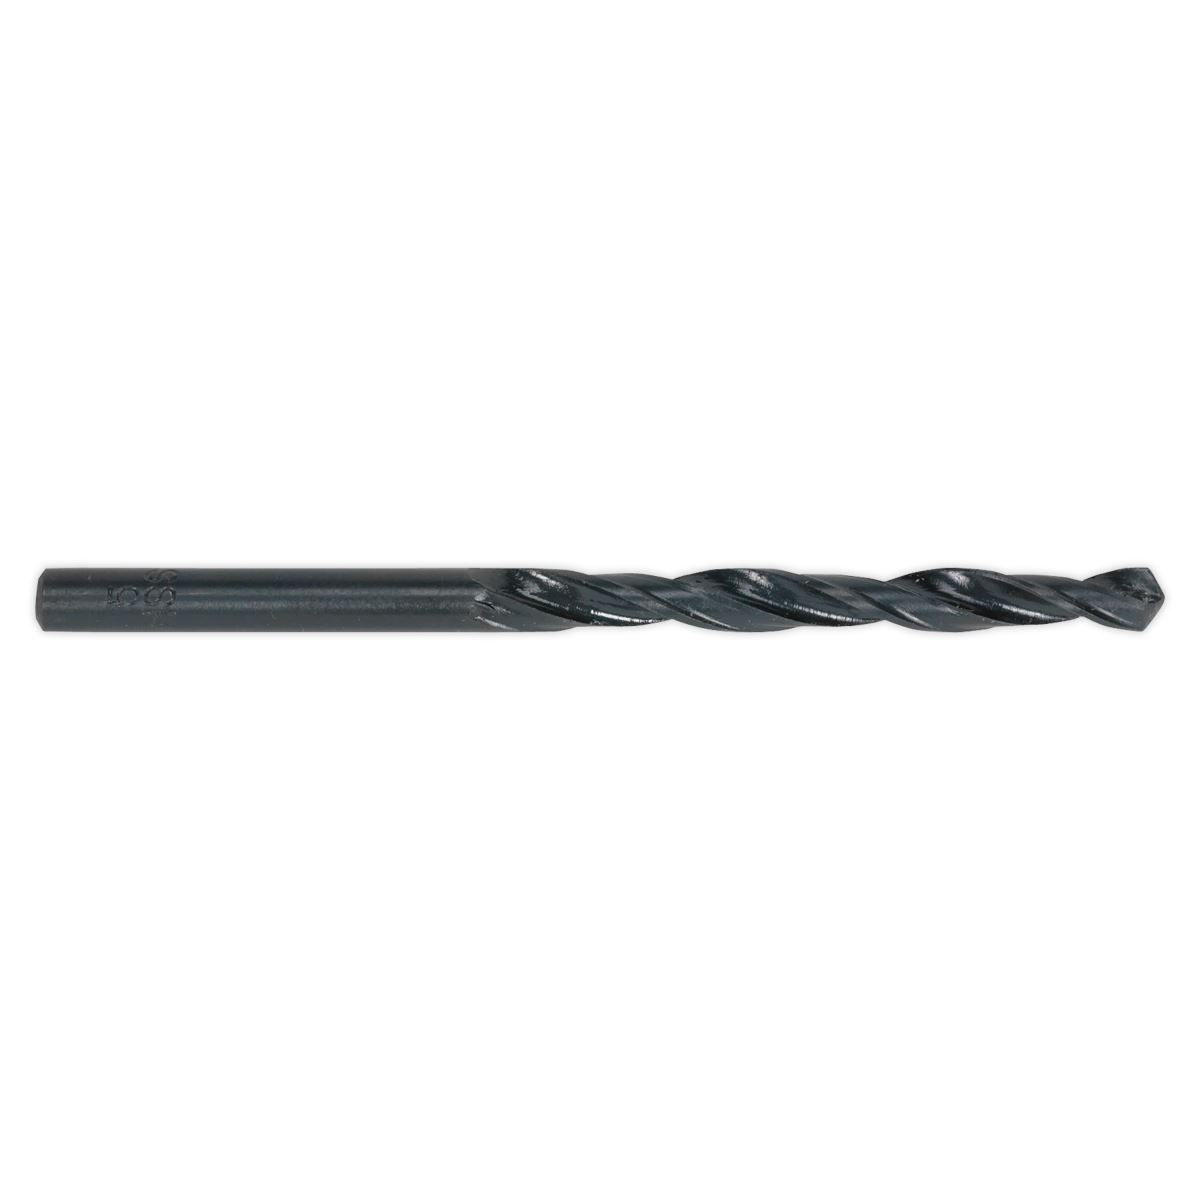 Sealey HSS Roll Forged Drill Bit Ø3.5mm Pack of 10